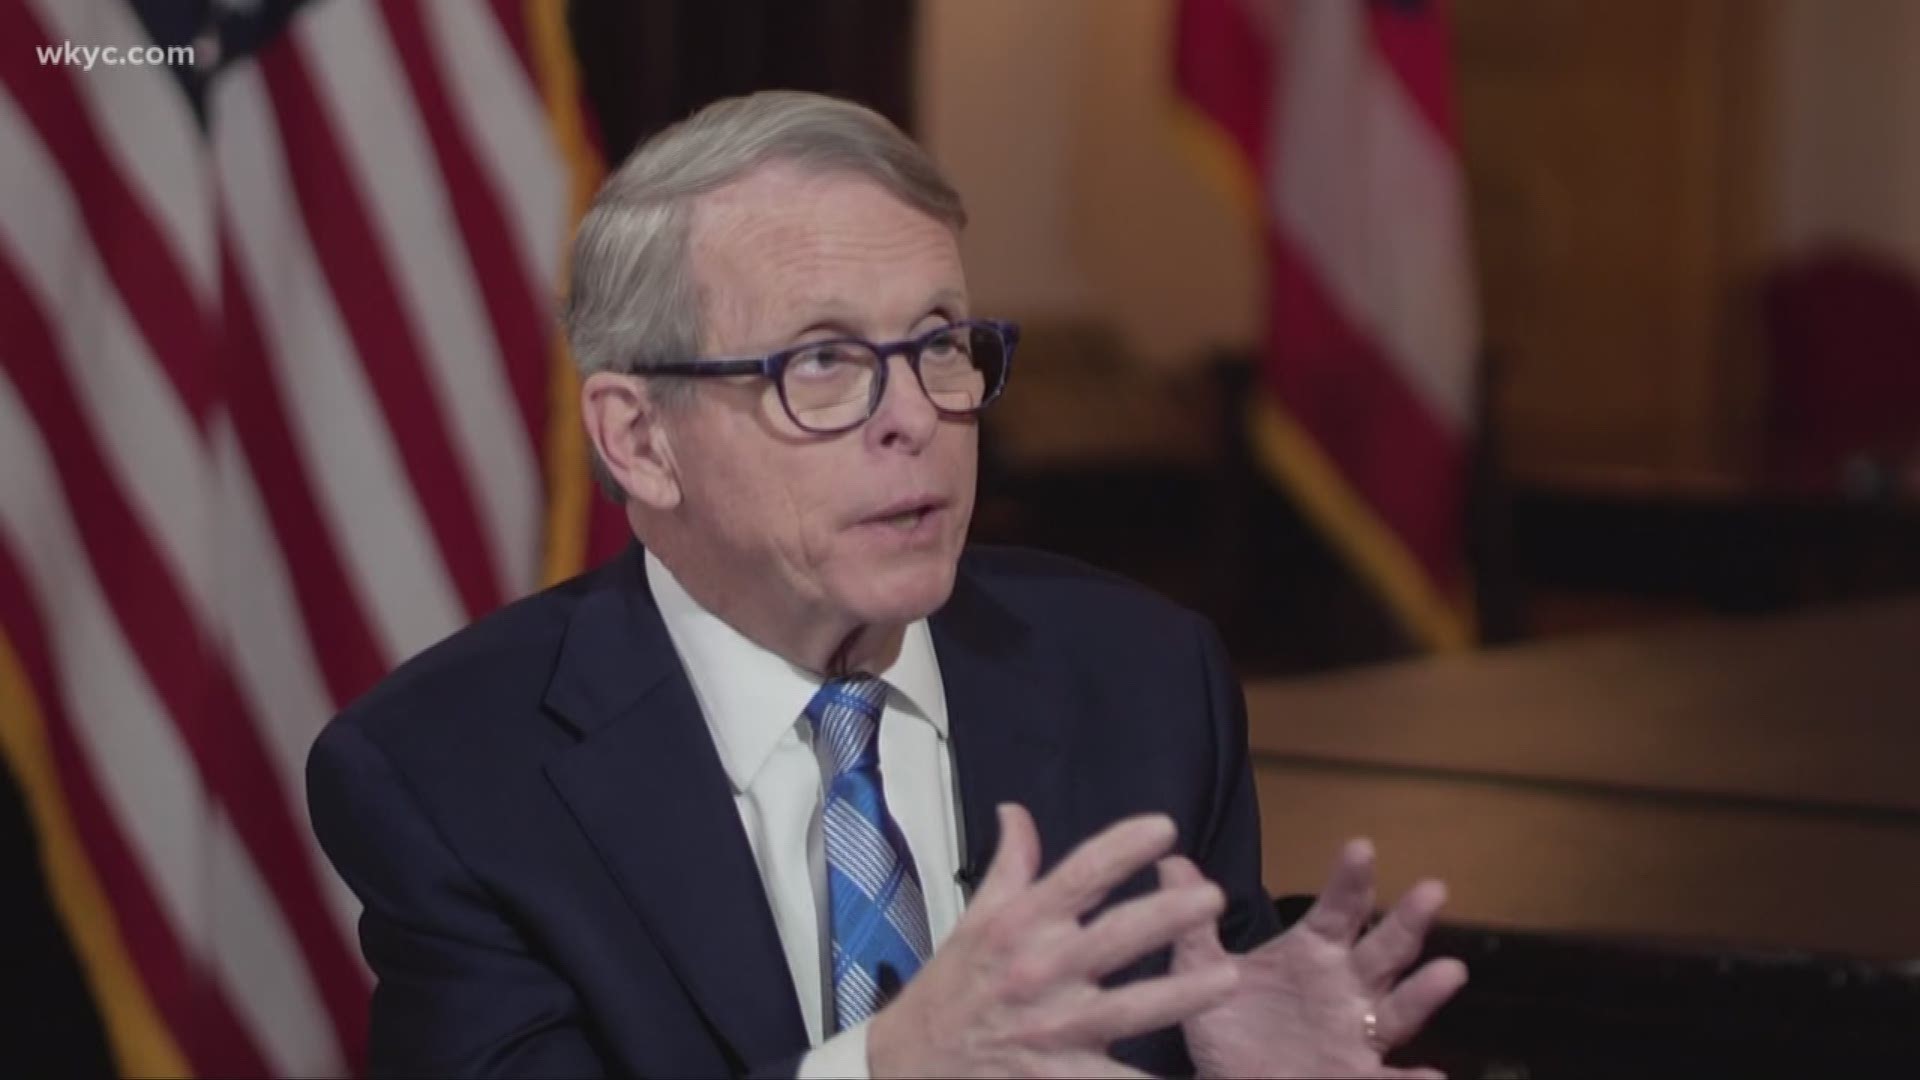 Feb. 20, 2019: (AP) -- Gov. Mike DeWine will announce Thursday his proposed recommendation for increasing the state gas tax to address a chronic shortfall in spending on road renovations, the governor said at an annual forum sponsored by The Associated Press.